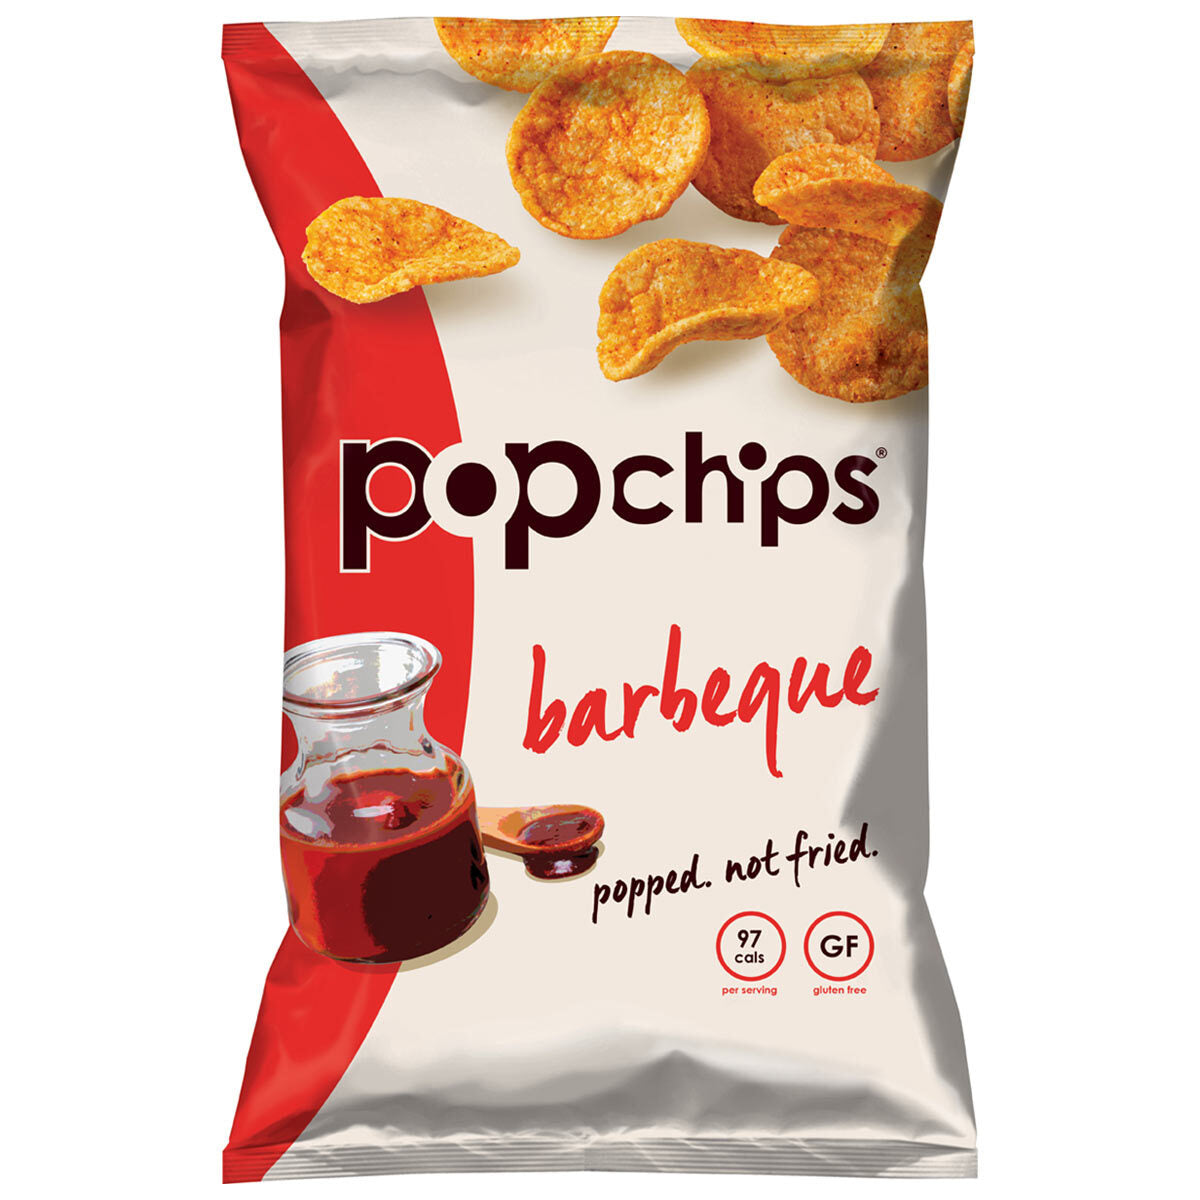 Popchips BBQ Popped Potato Chips 311g - Irresistible Flavour, Guilt-Free Crunch